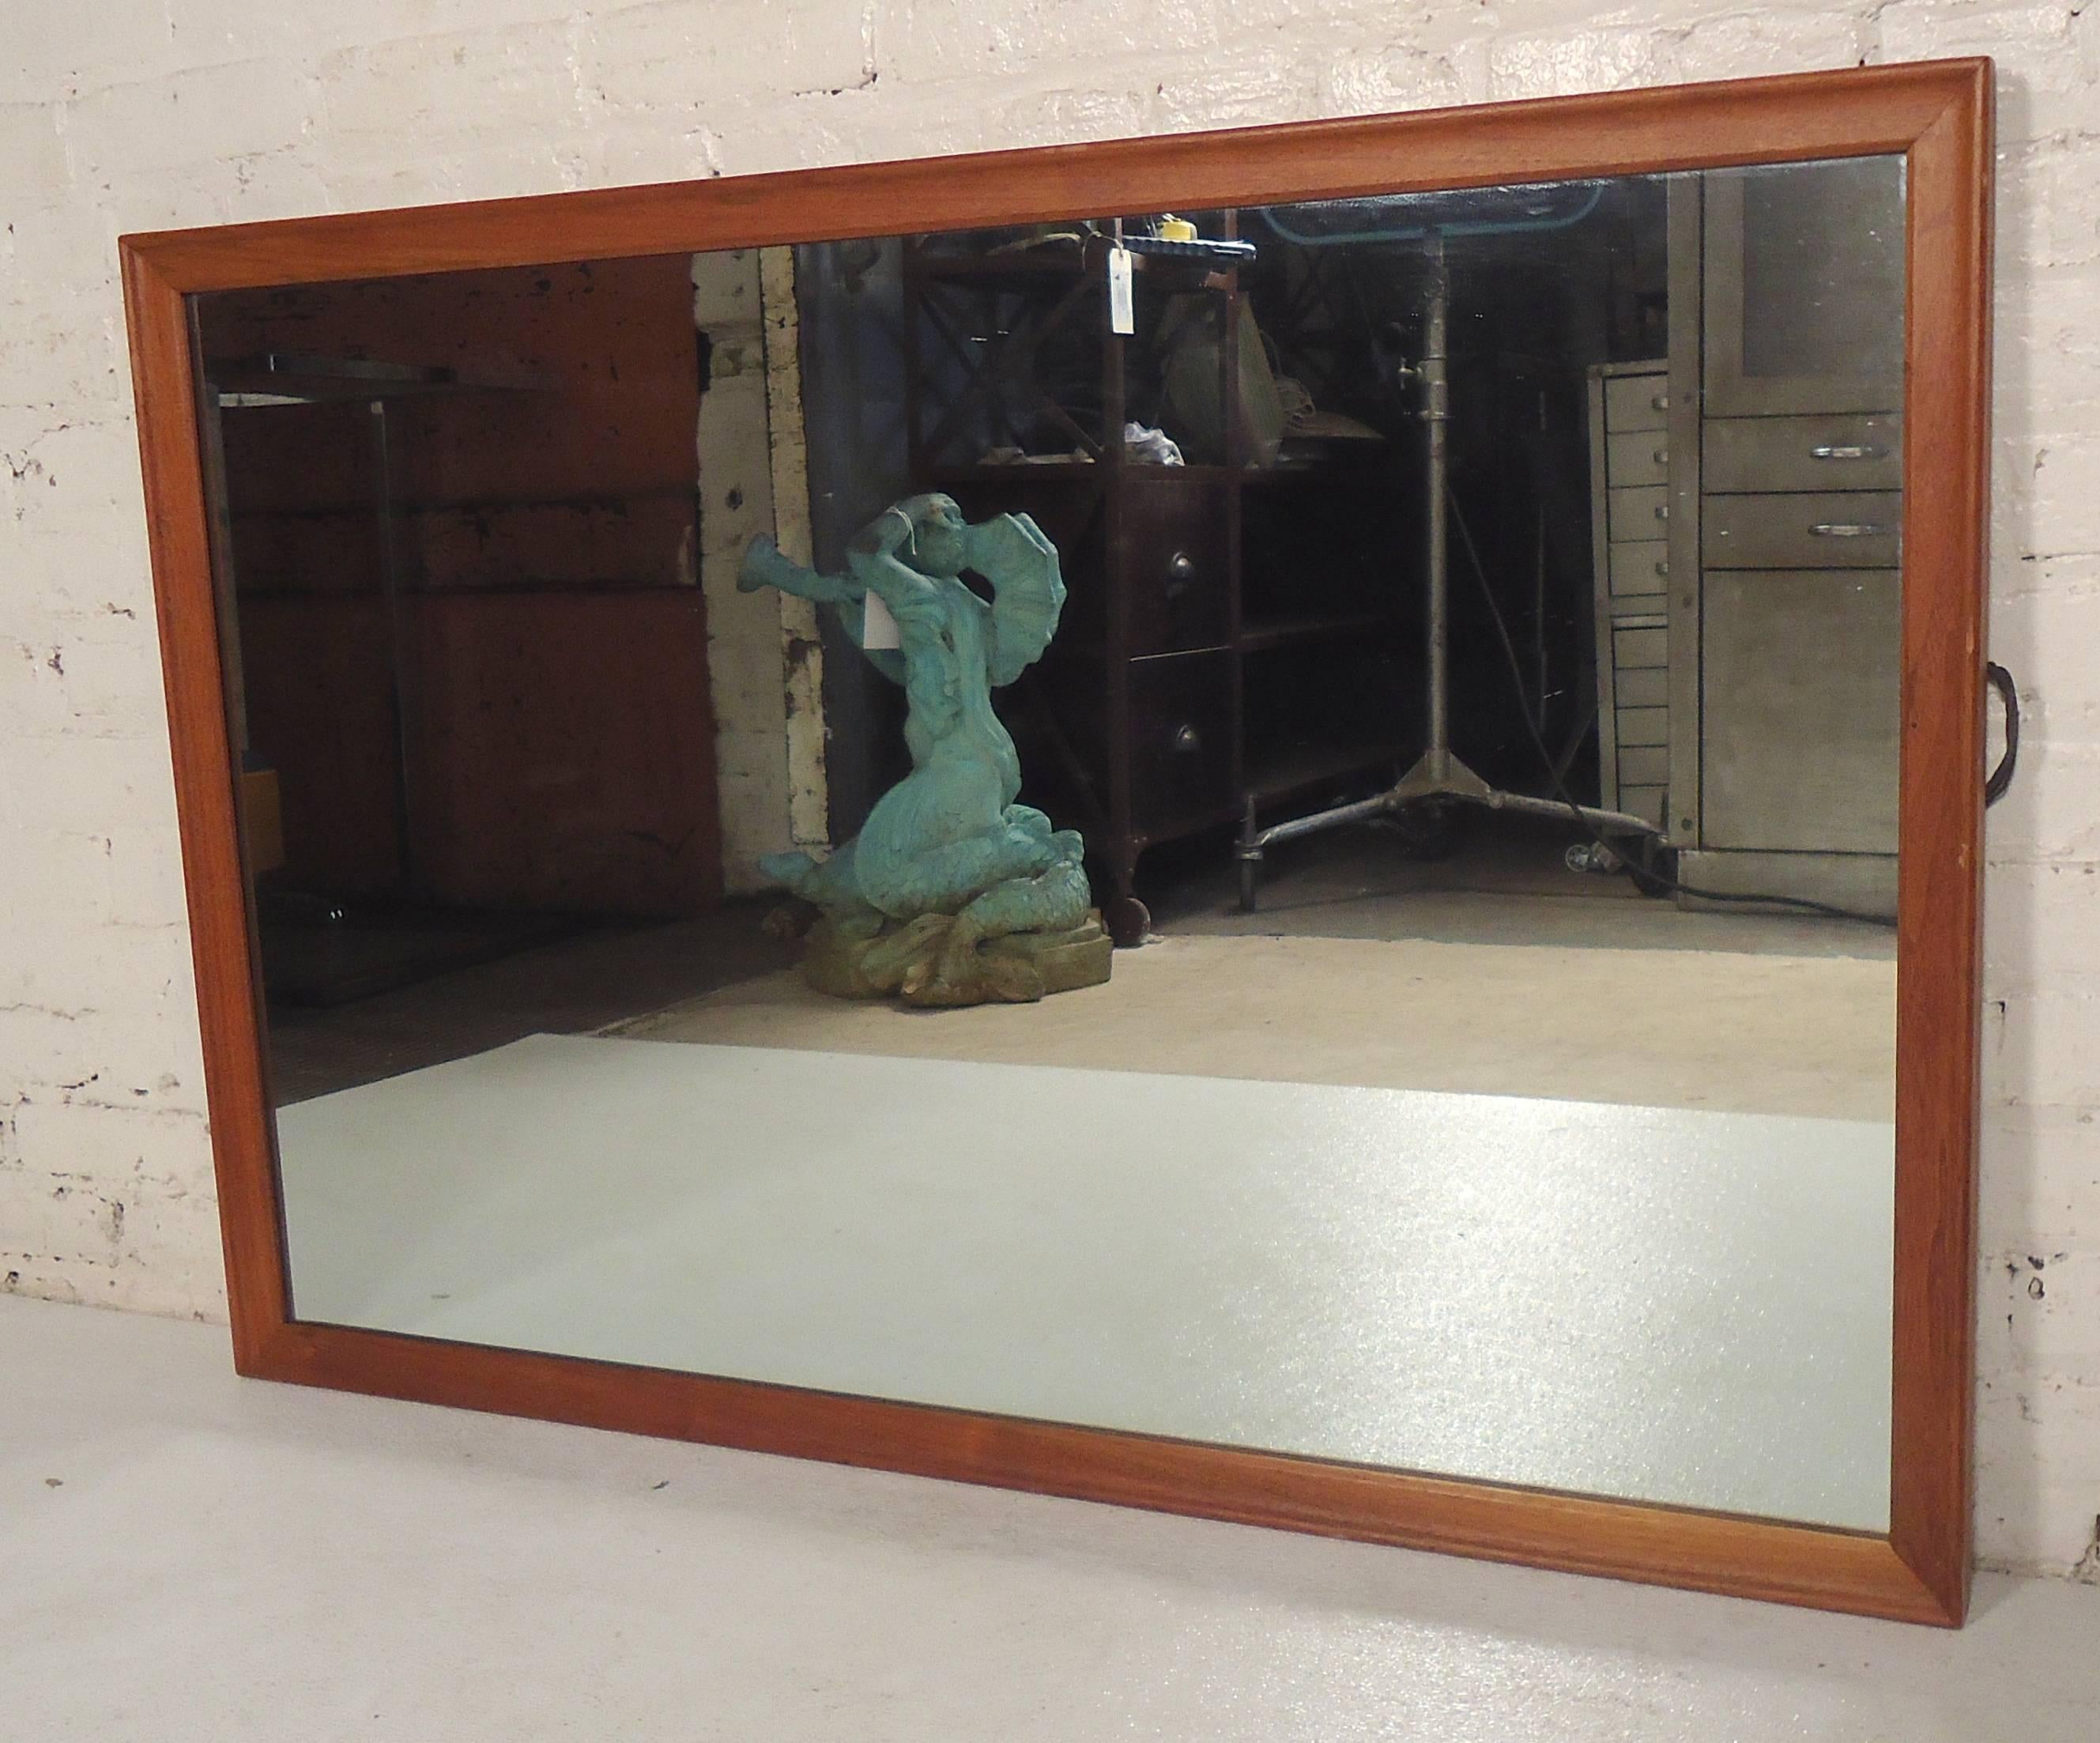 Vintage wall mirror with teak frame. Simple and modern design. Can be hung horizontal or vertical.

(Please confirm item location - NY or NJ - with dealer).
     